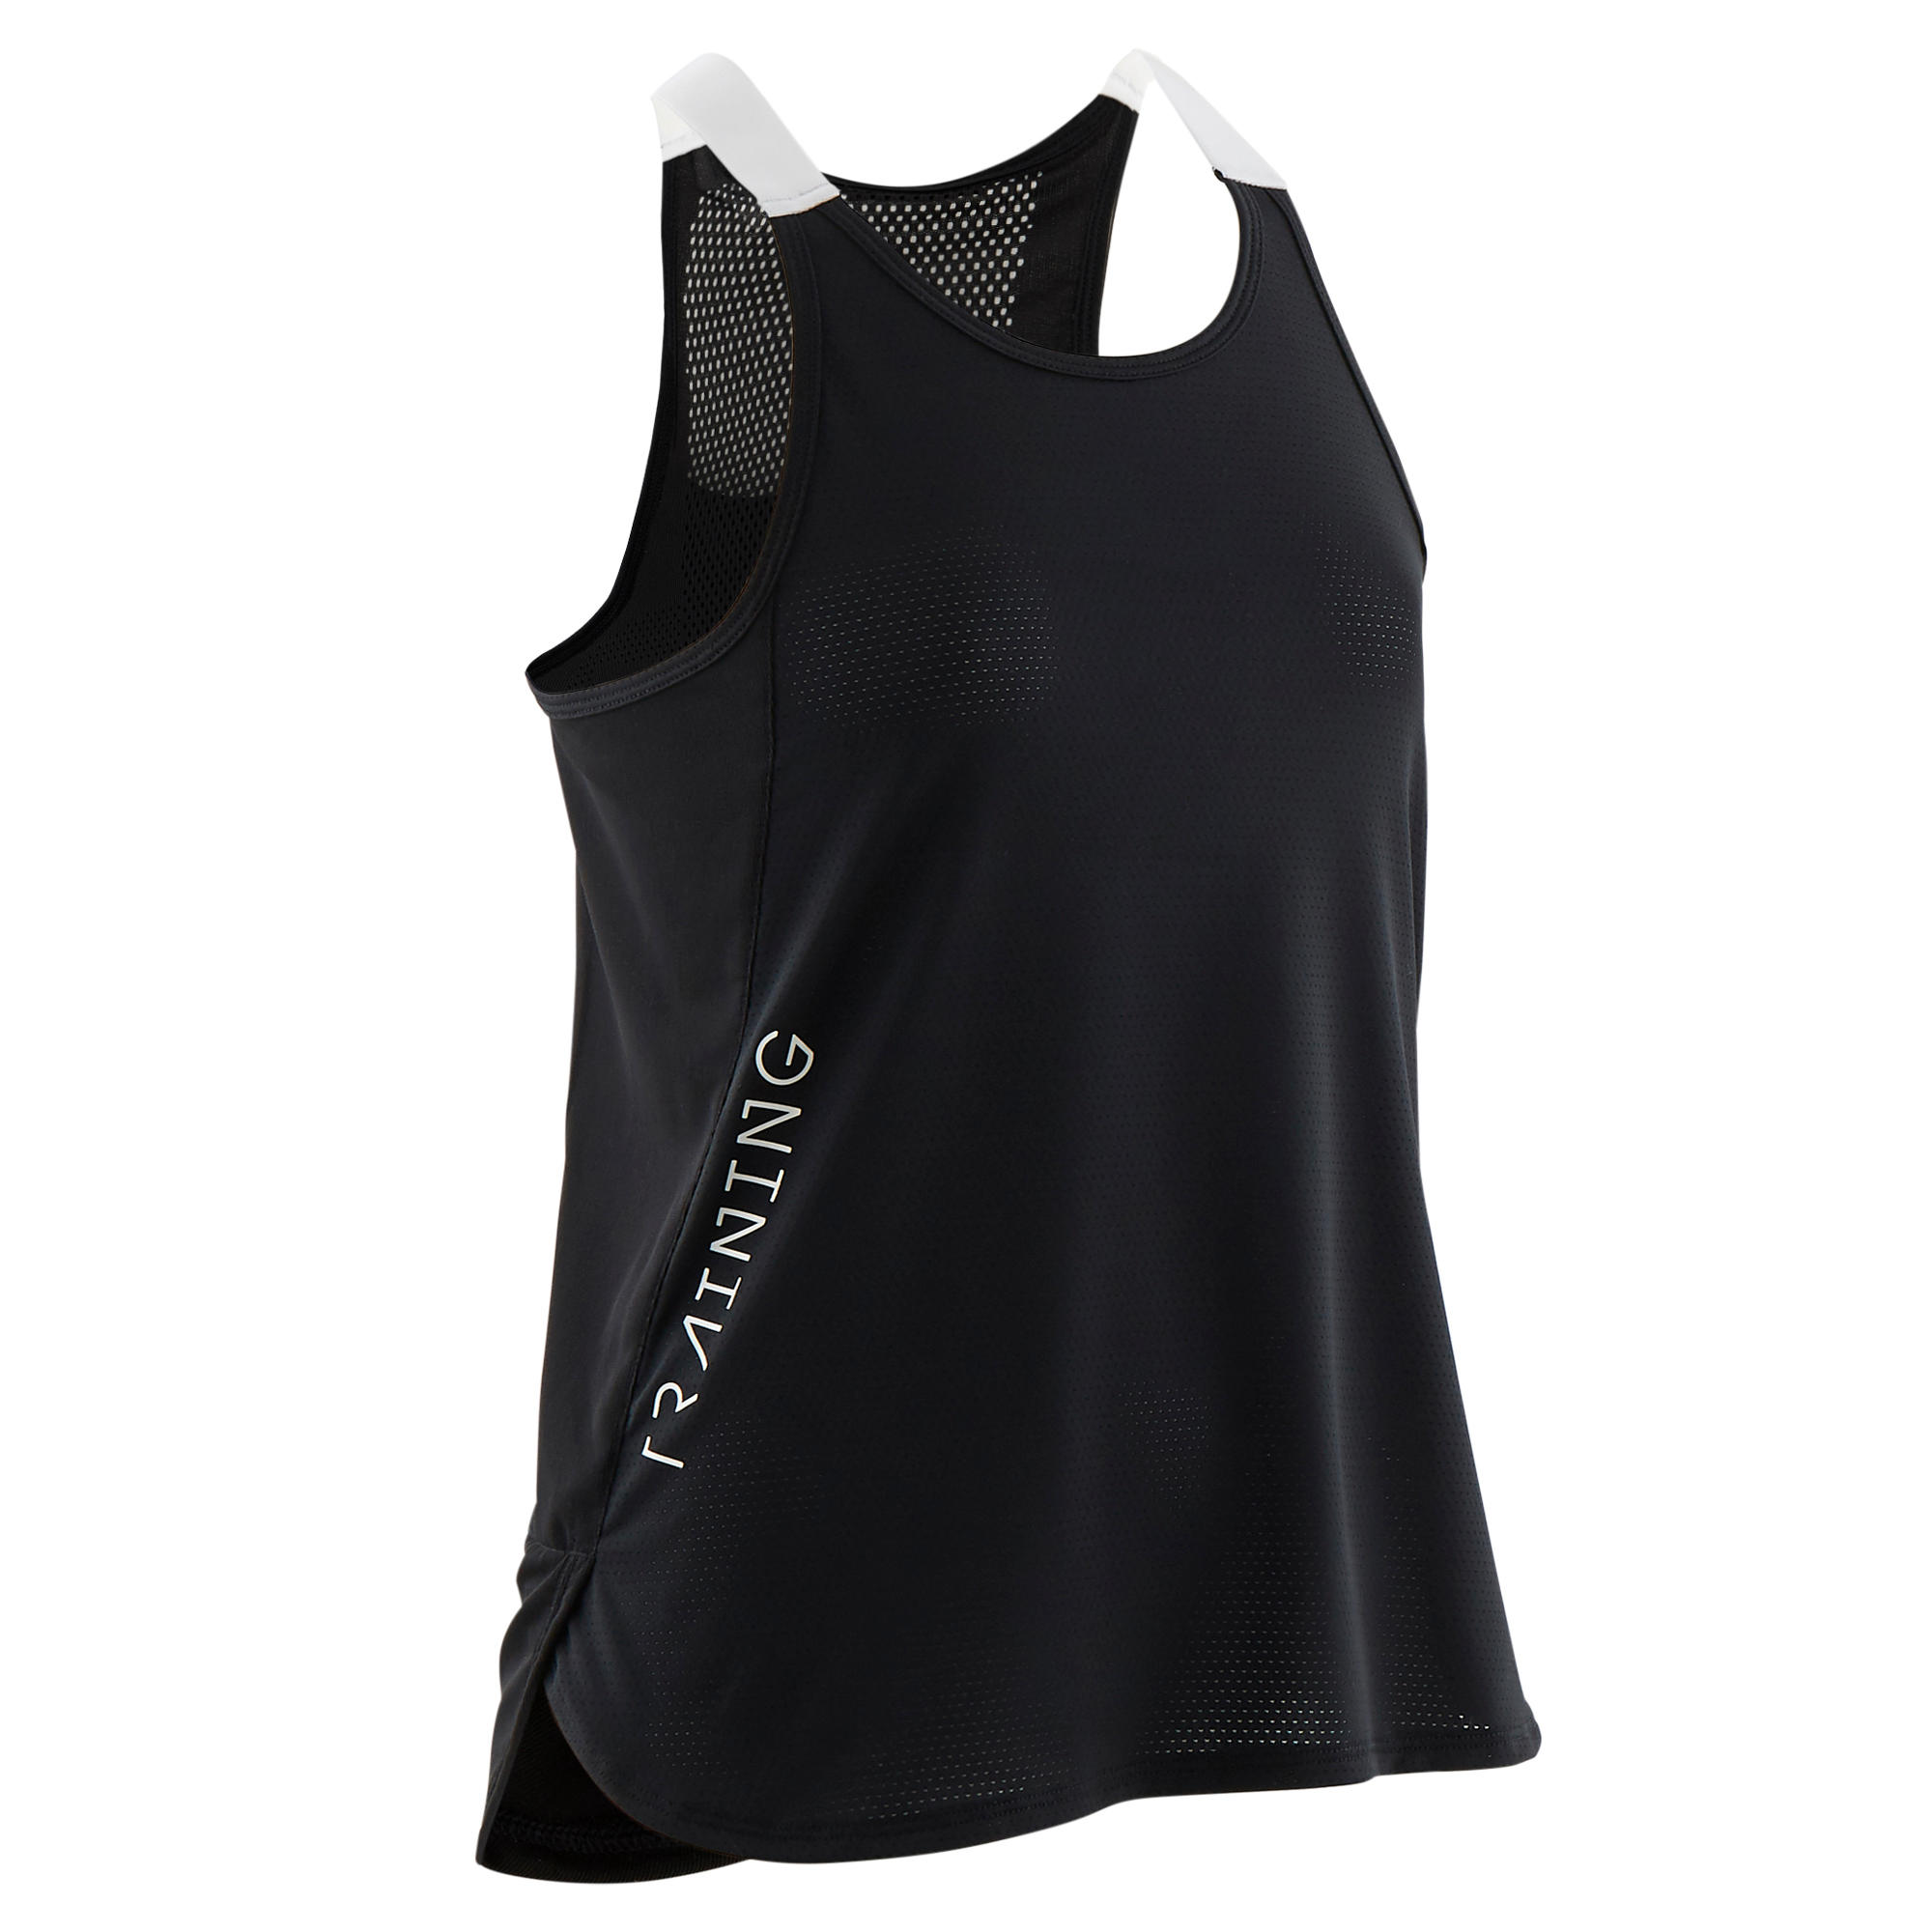 Girls' Technical Breathable Tank Top - Black/White 1/4